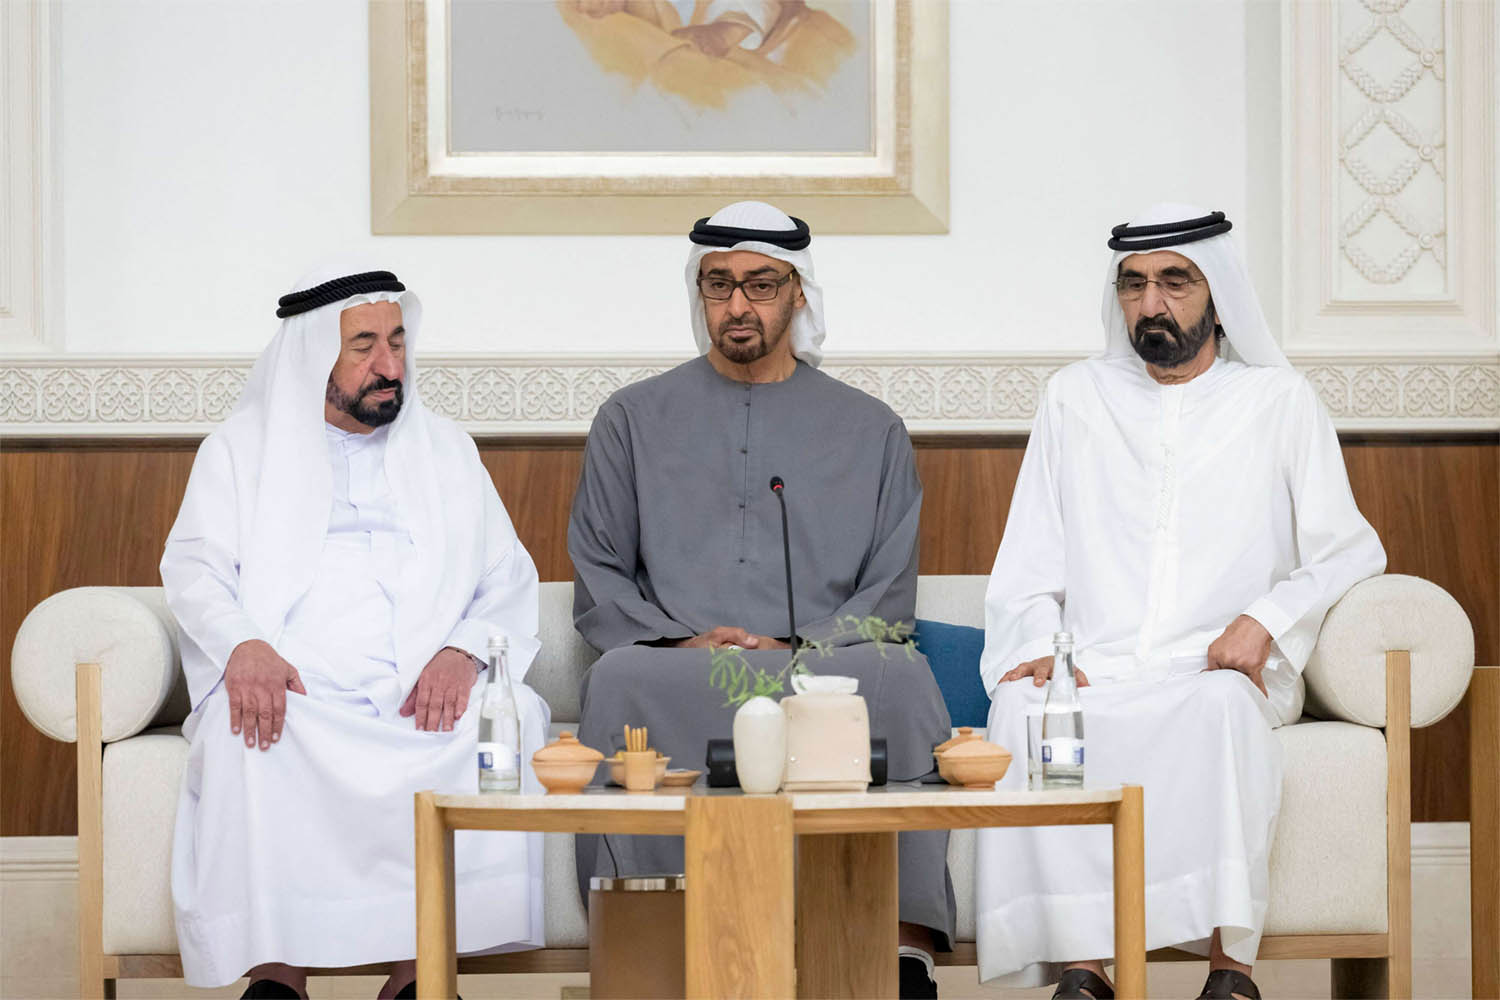 Sheikh Mohamed bin Zayed al-Nahyan led a Middle East realignment